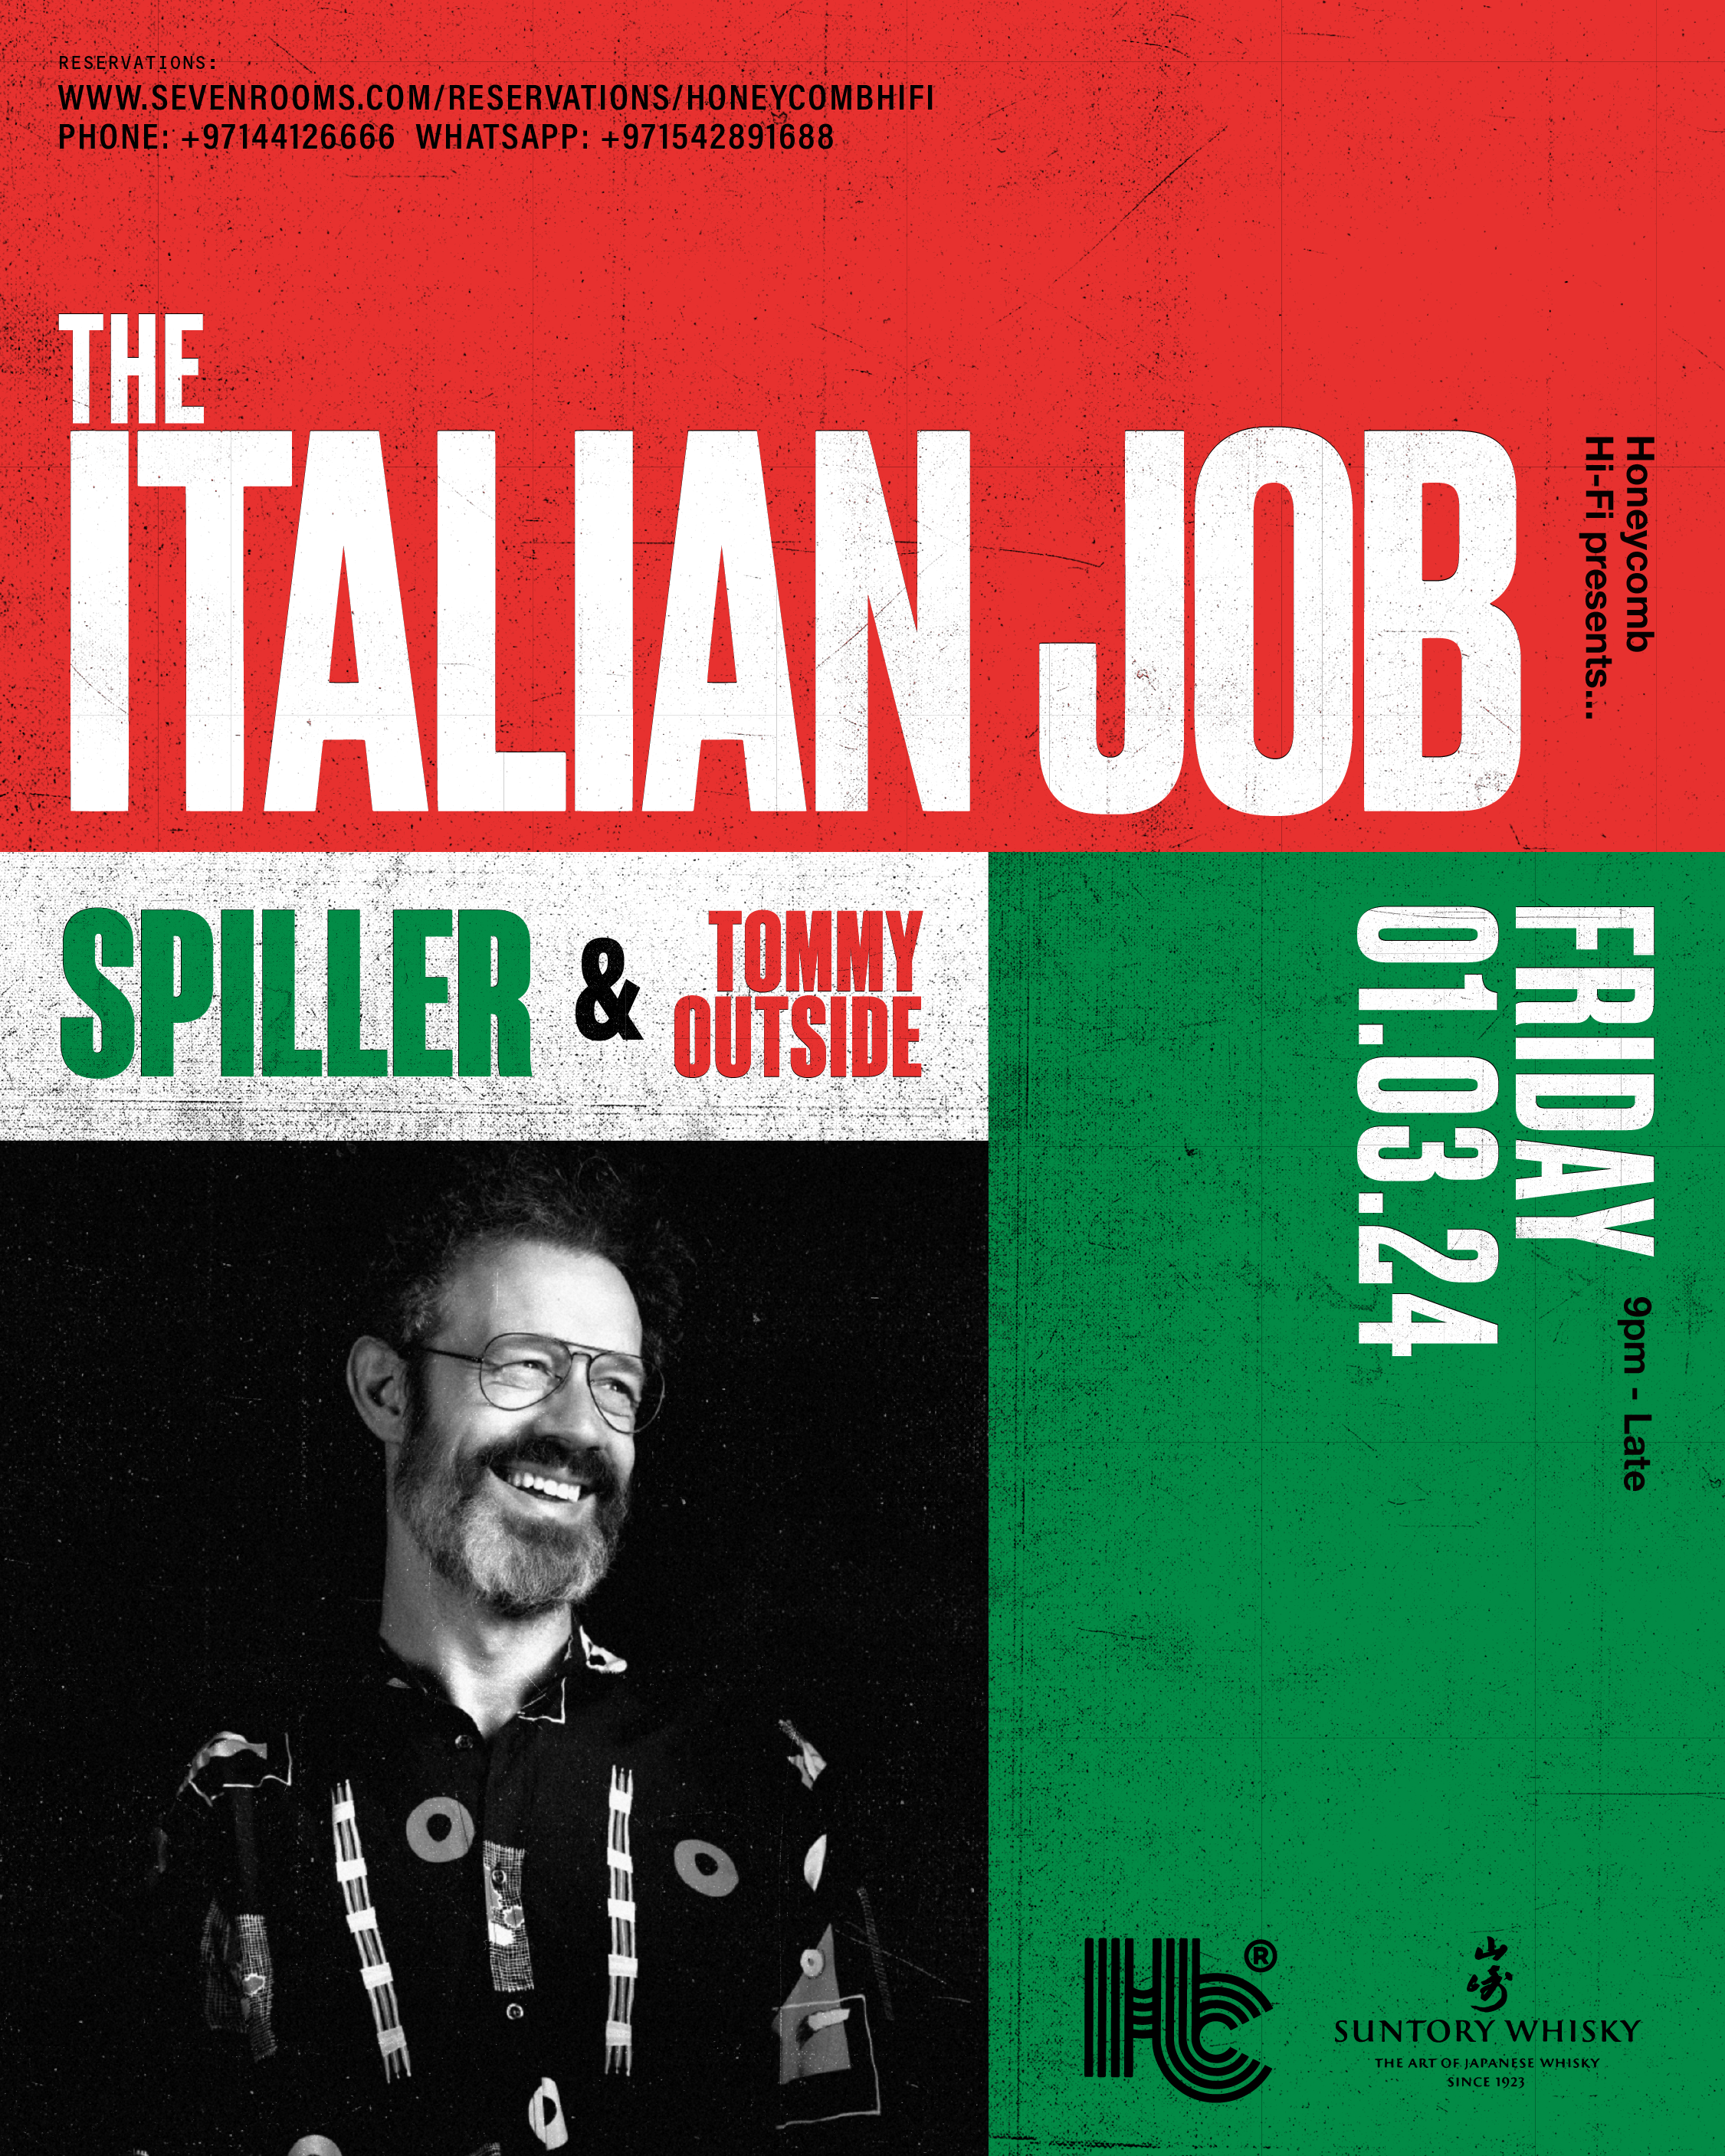 THE ITALIAN JOB Spiller and Tommy Outside - フライヤー表